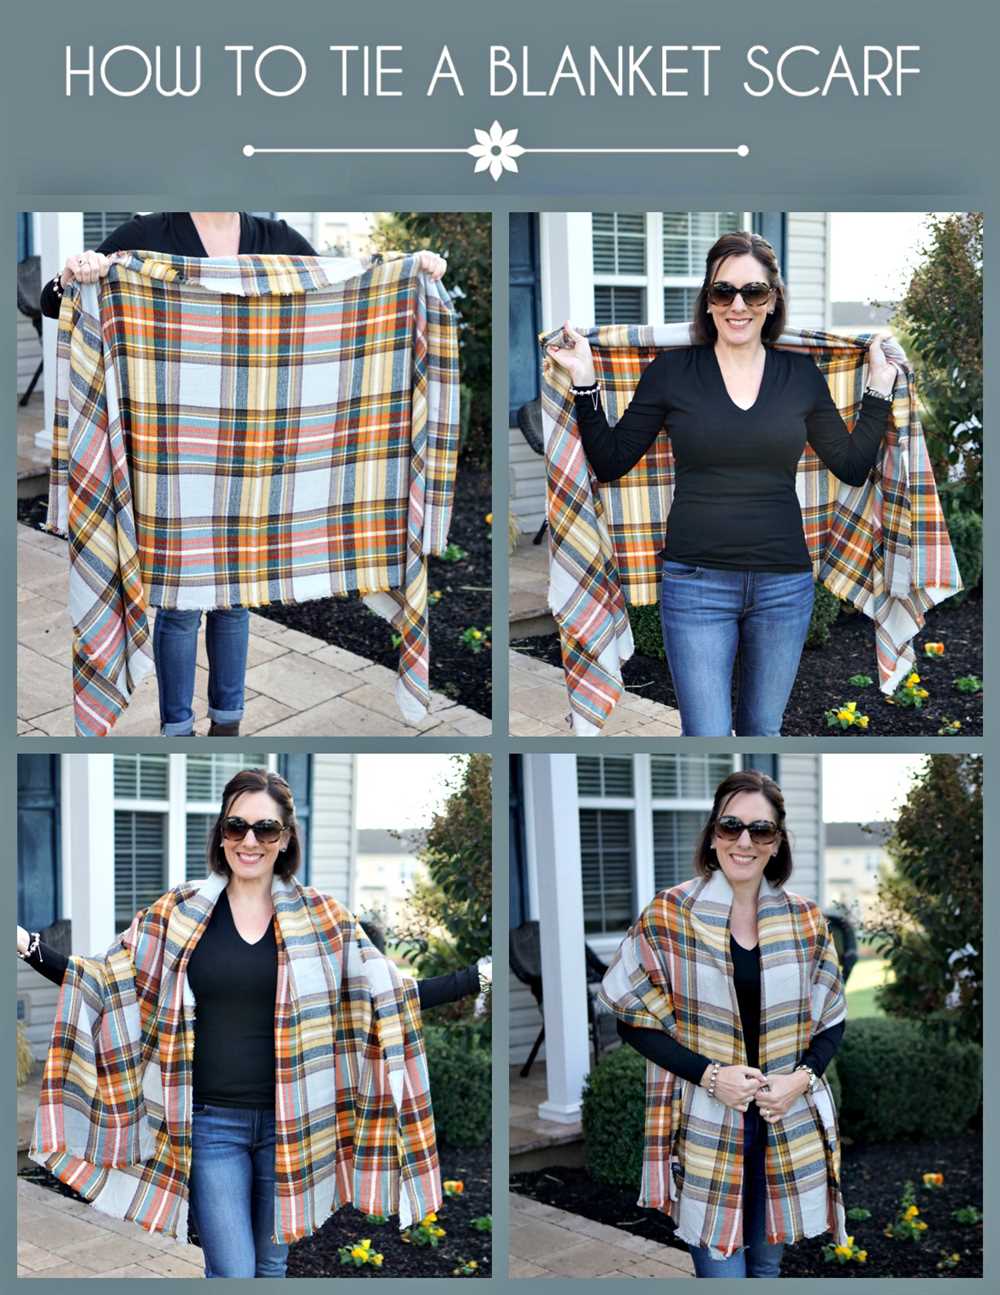 Blanket scarf how to wear